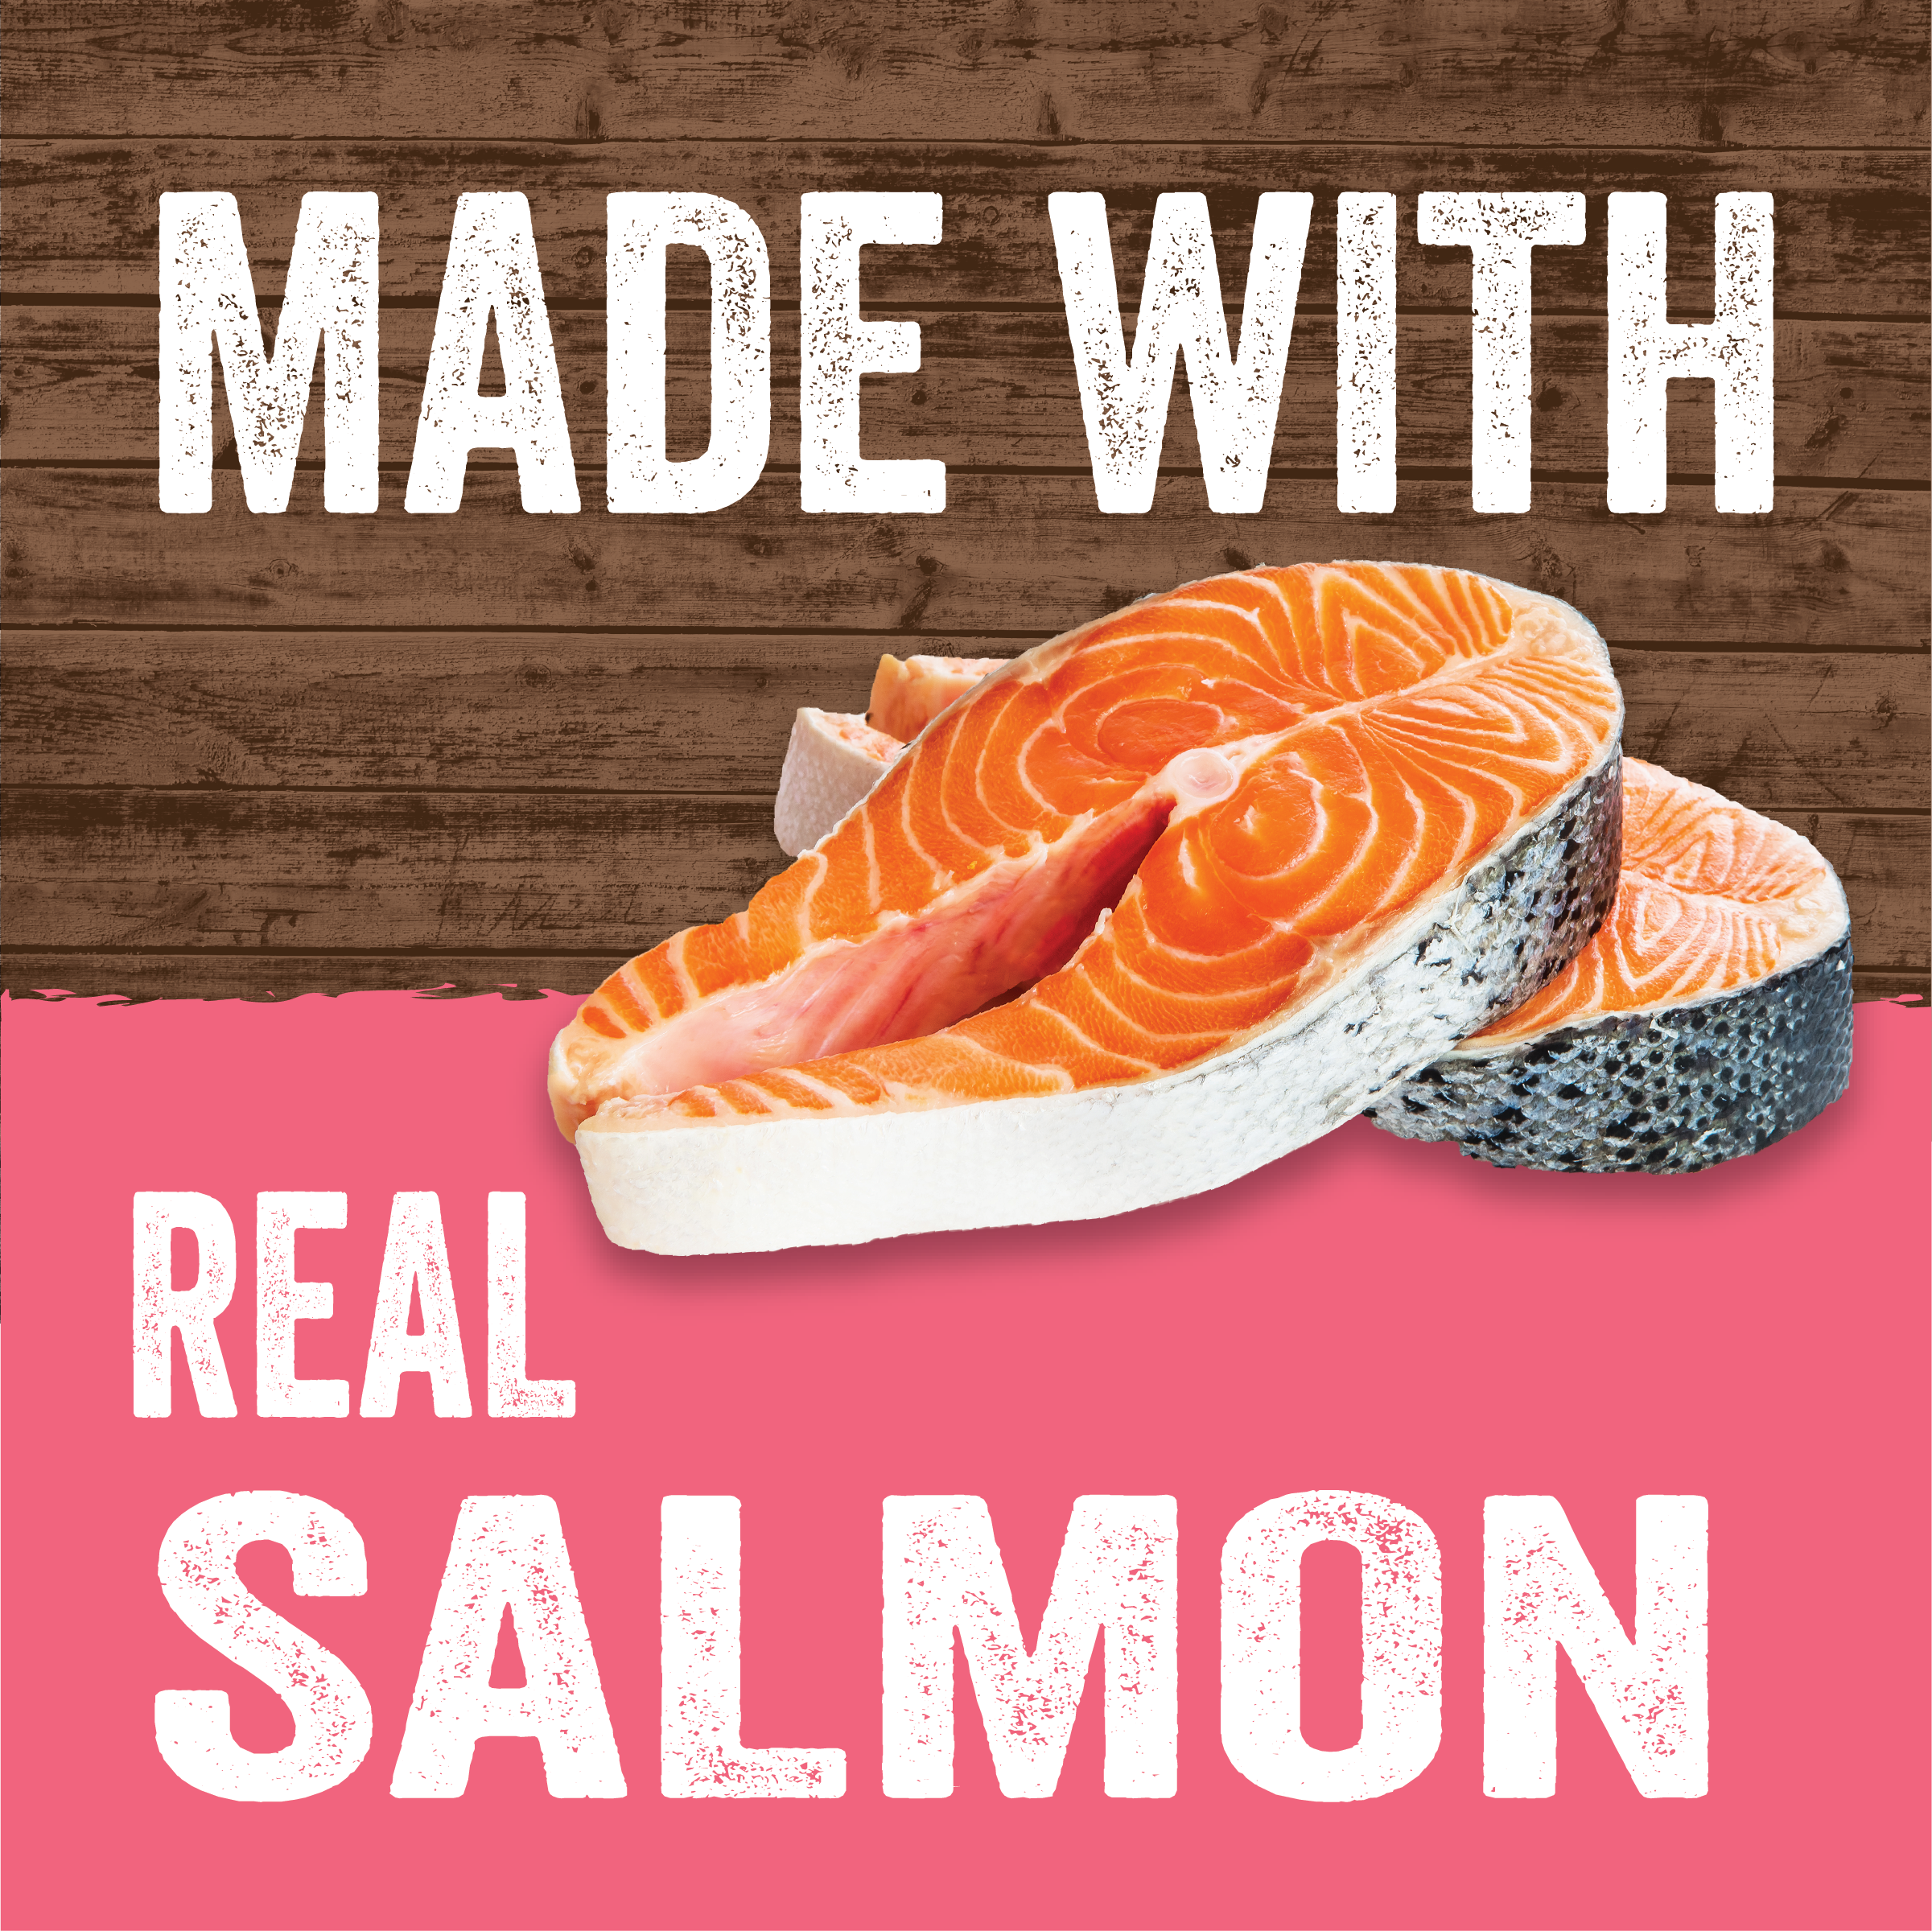 Evolve_Cat_Classic_CraftedMeals_Salmon_Layout-03.png